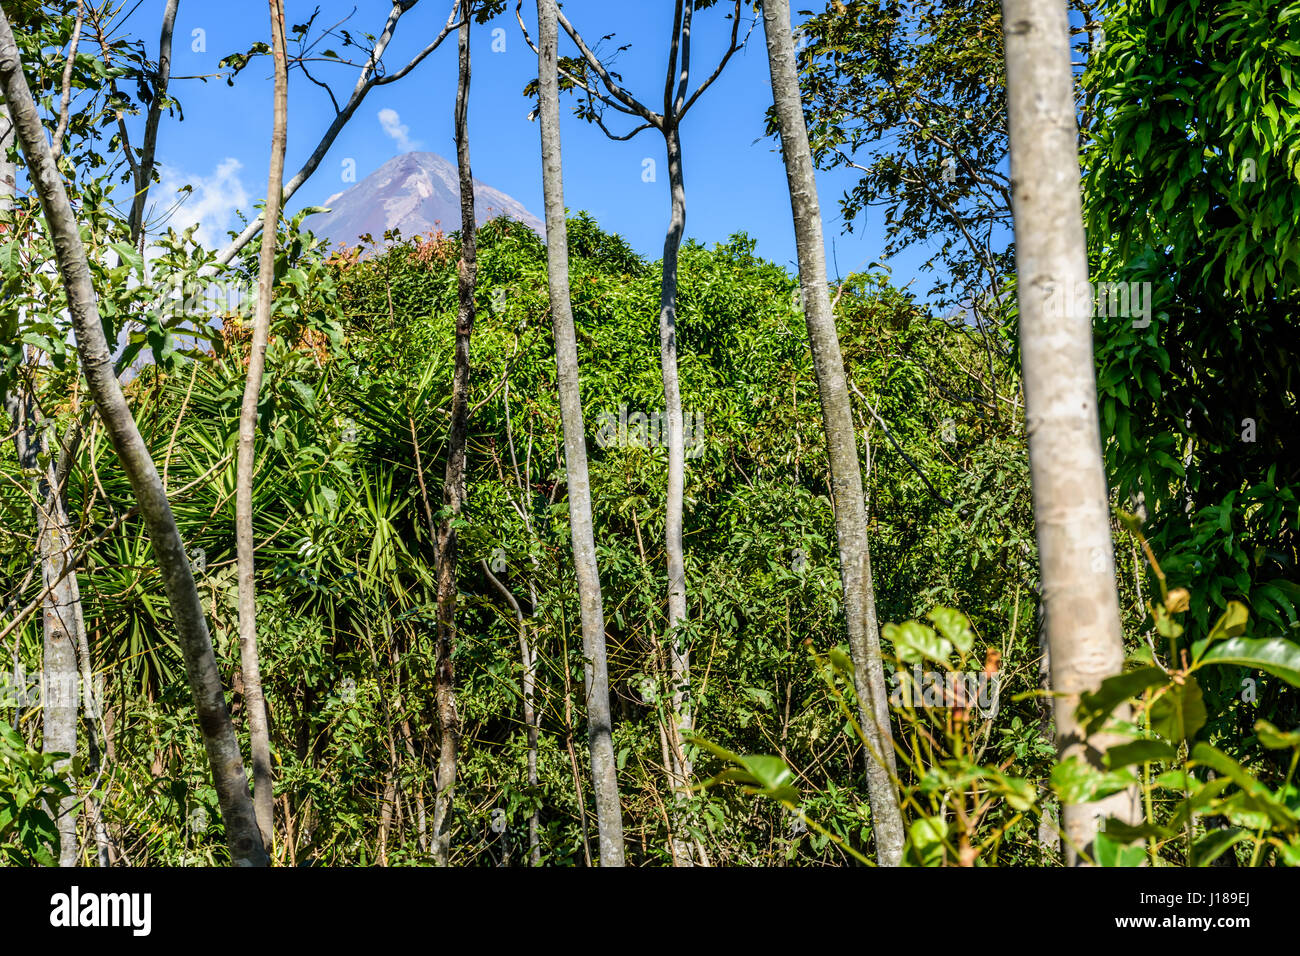 Woodland & mahogany trees with smoke puffing from active Pacaya volcano in background in Escuintla, Guatemala, Central America Stock Photo